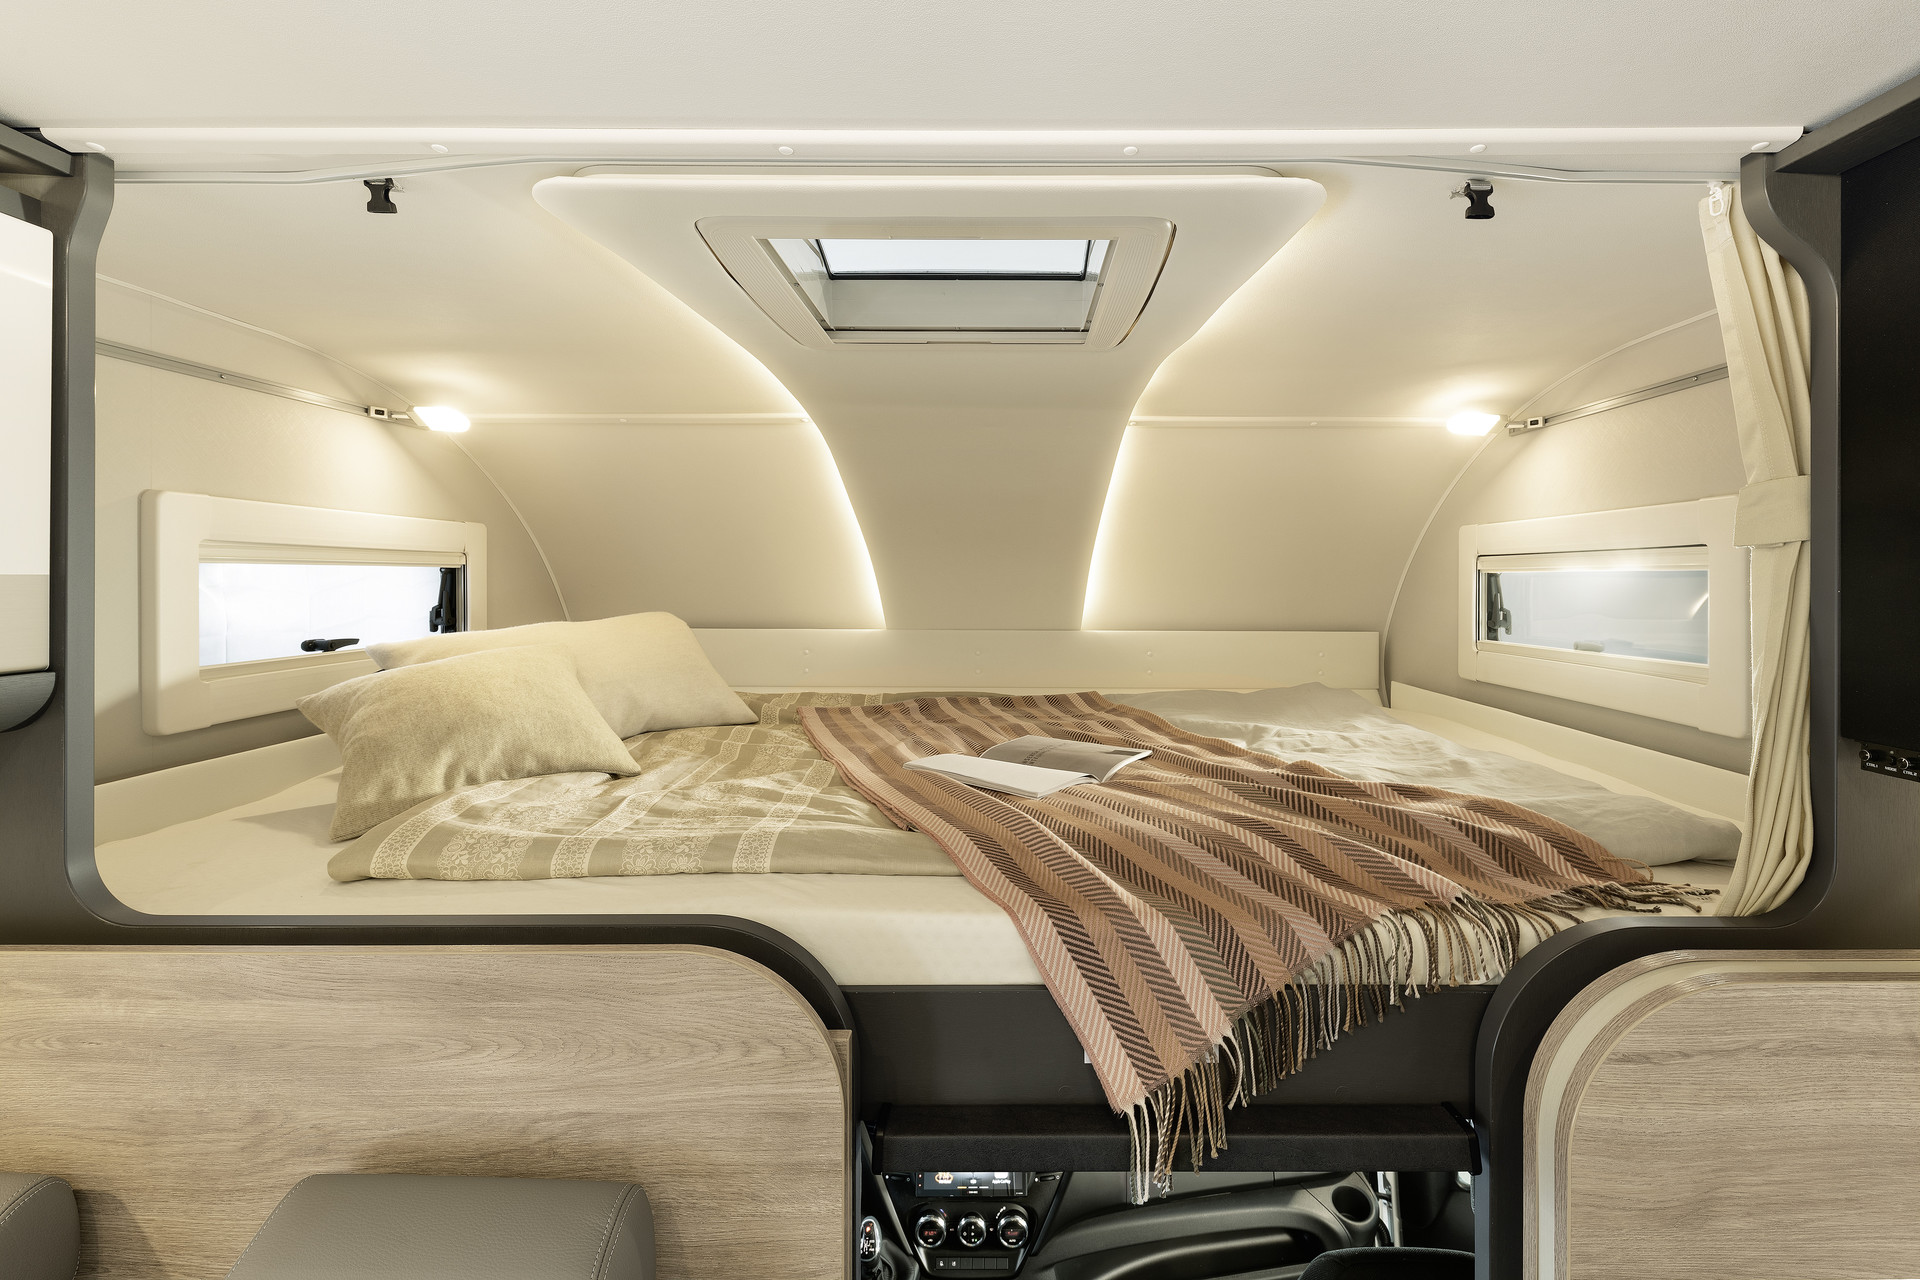 The alcove serves as a comfortable, separate sleeping area. At 215 x 150 cm, it is large enough even for taller people. The alcove can also be used as an extended storage space. It can be folded up for easy access to the cab.